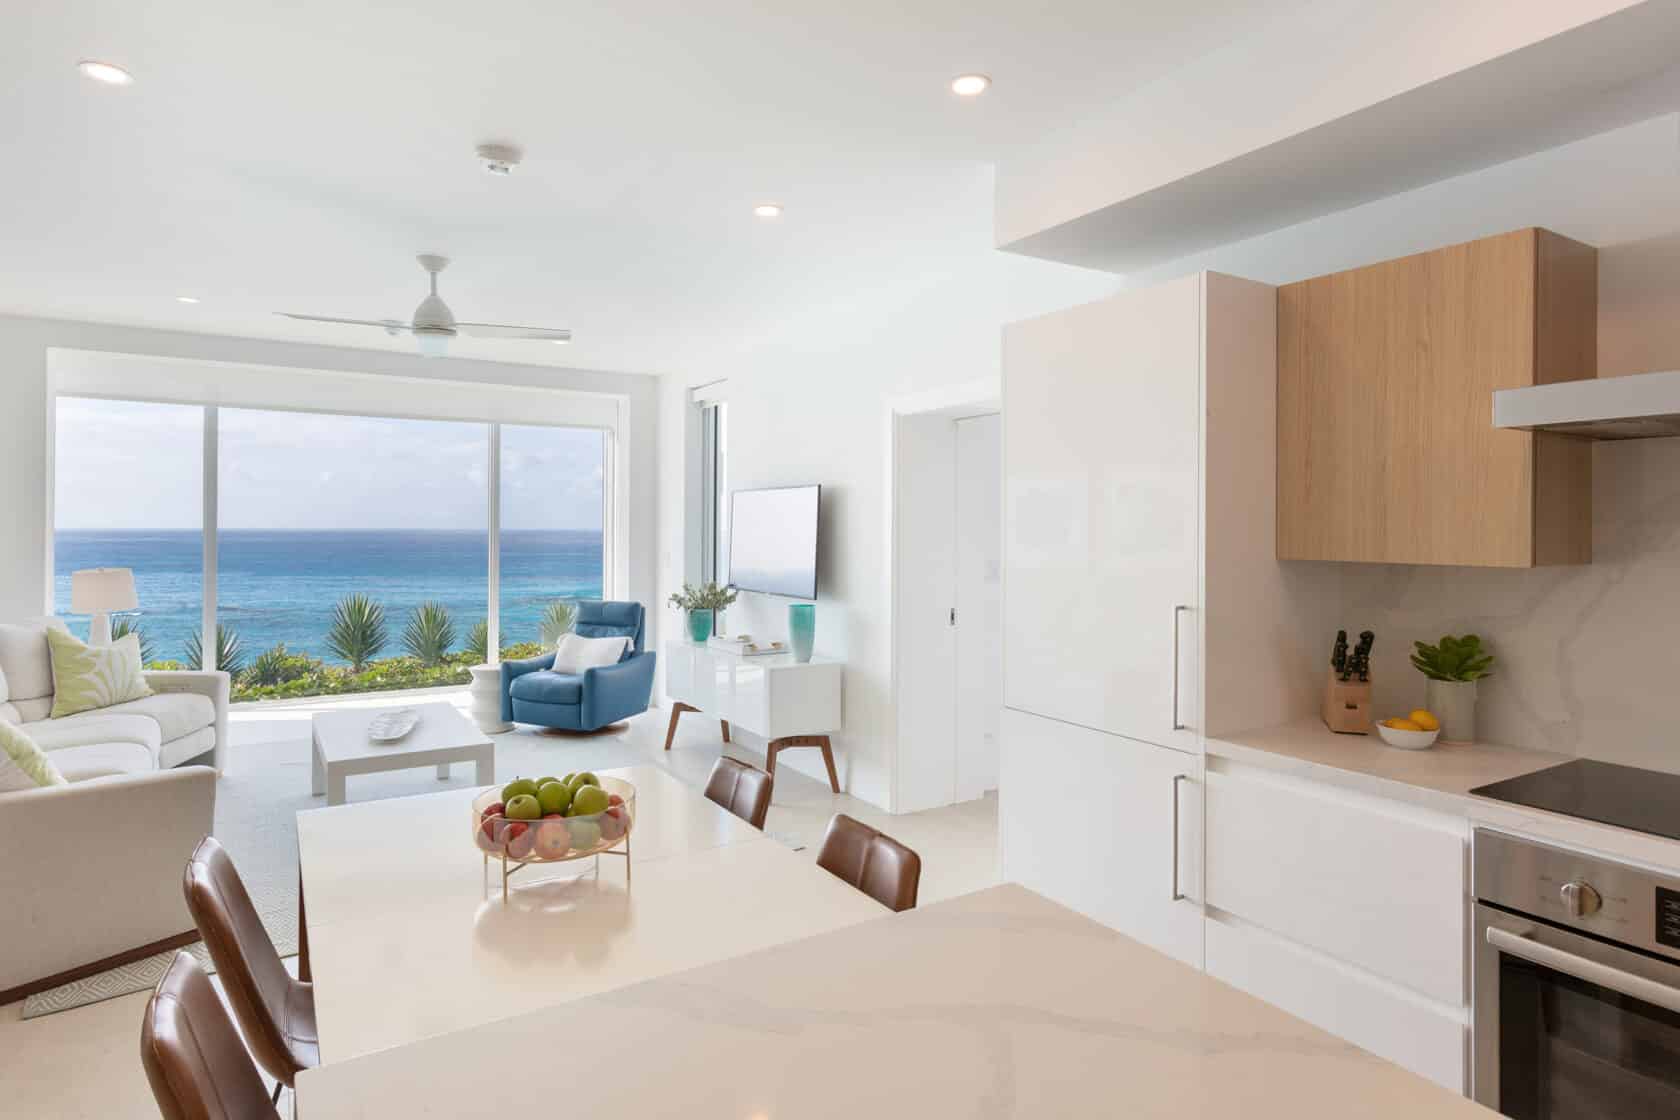 A living room with a view of the ocean, ideal for Bermuda vacation rentals.